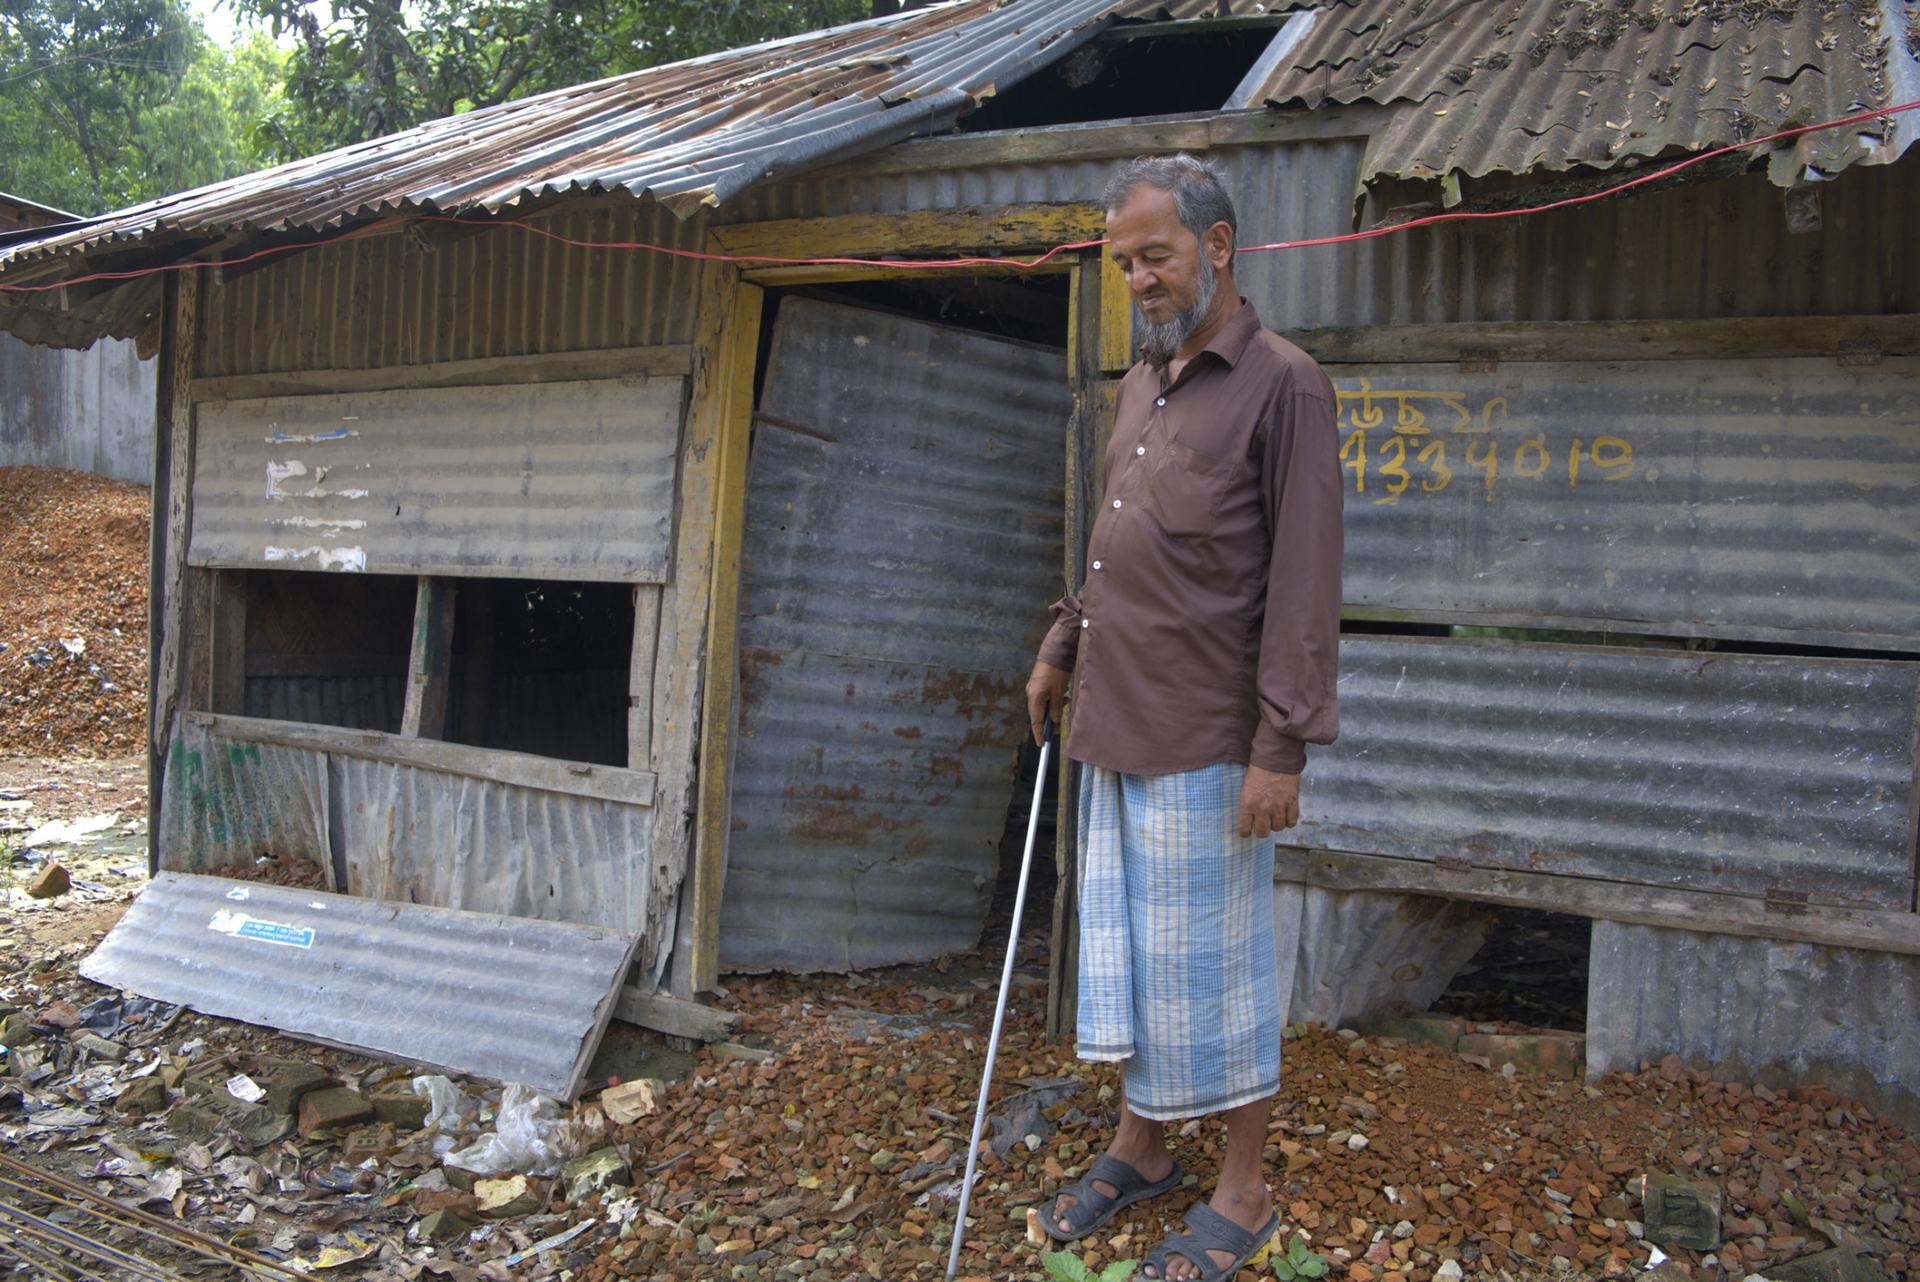 During a cyclone evacuation, Nur Nobi’s family forgot about him as they fled to a storm shelter.